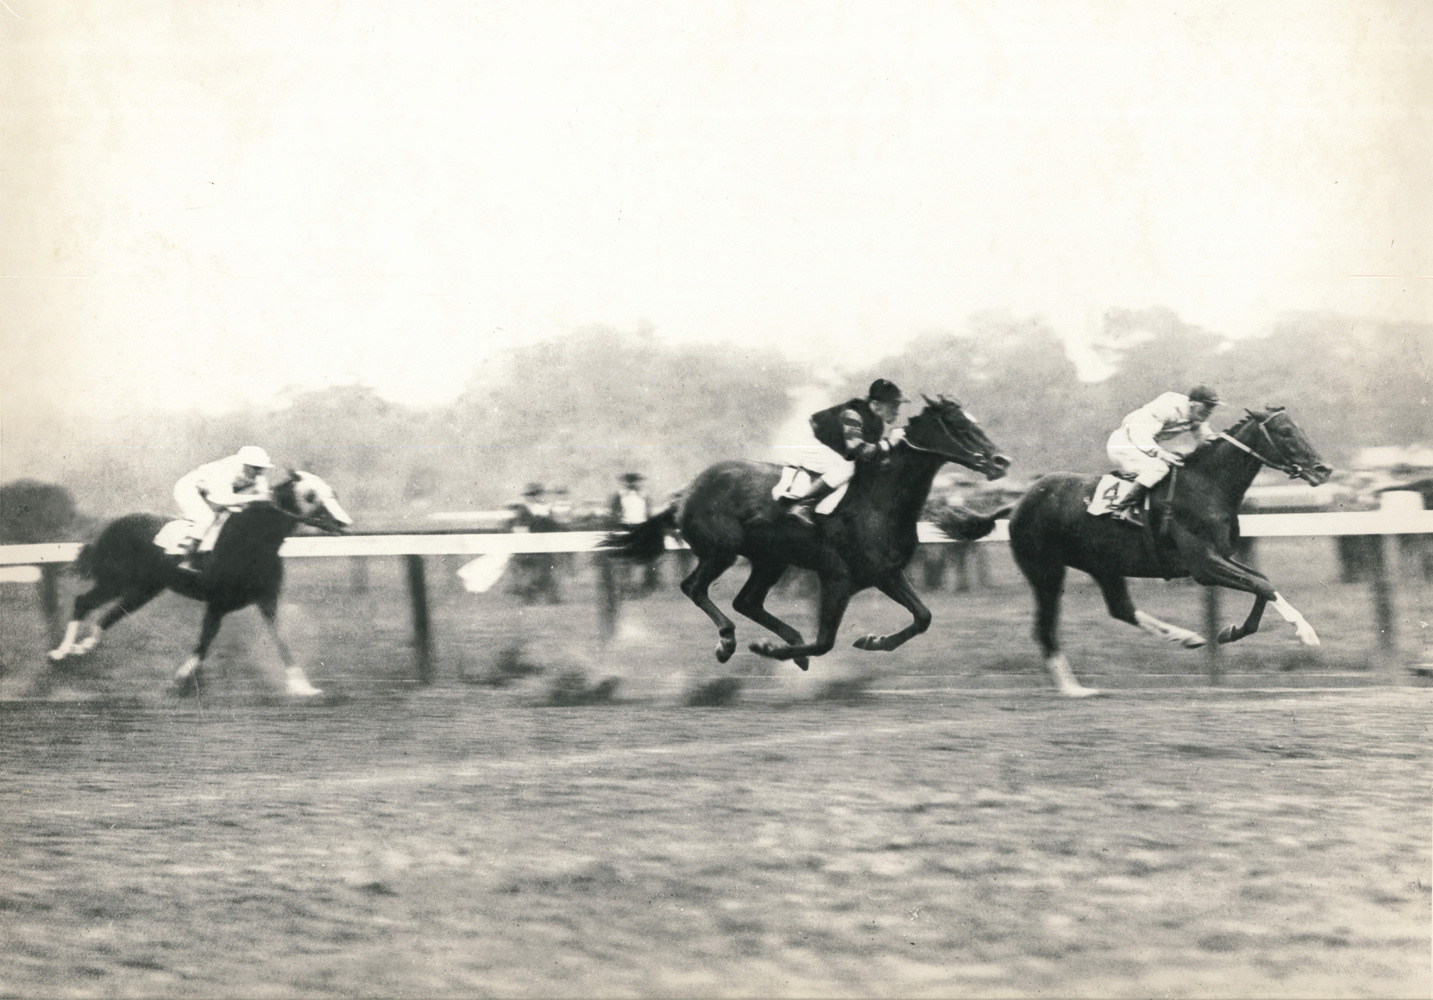 Willie Knapp and Upset defeating John Loftus and Man o' War in the 1919 Sanford Memorial at Saratoga (C. C. Cook/Museum Collection)